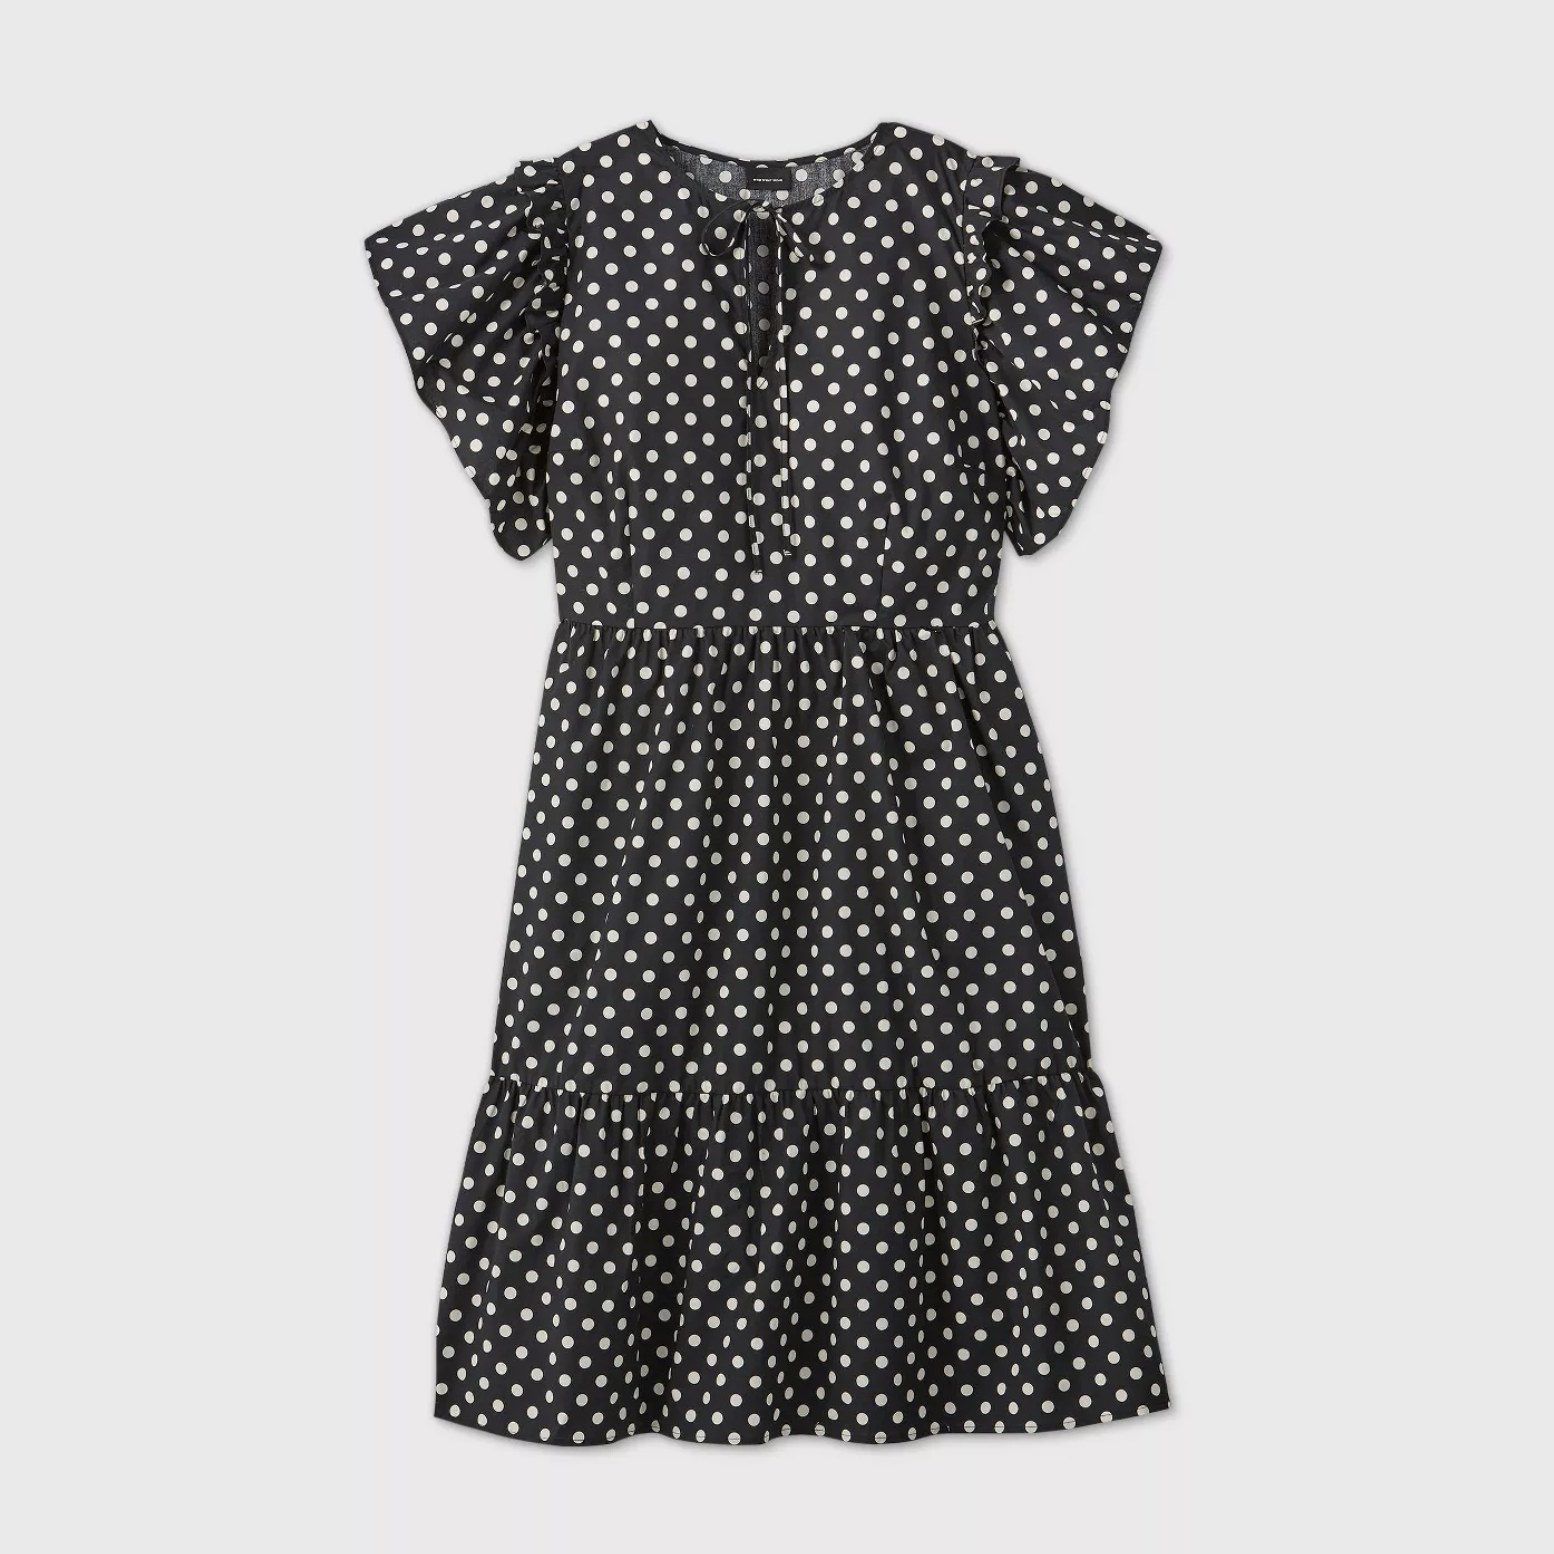 An image of a black and white polka-dot dress with short ruffle sleeves and tiered hemlines